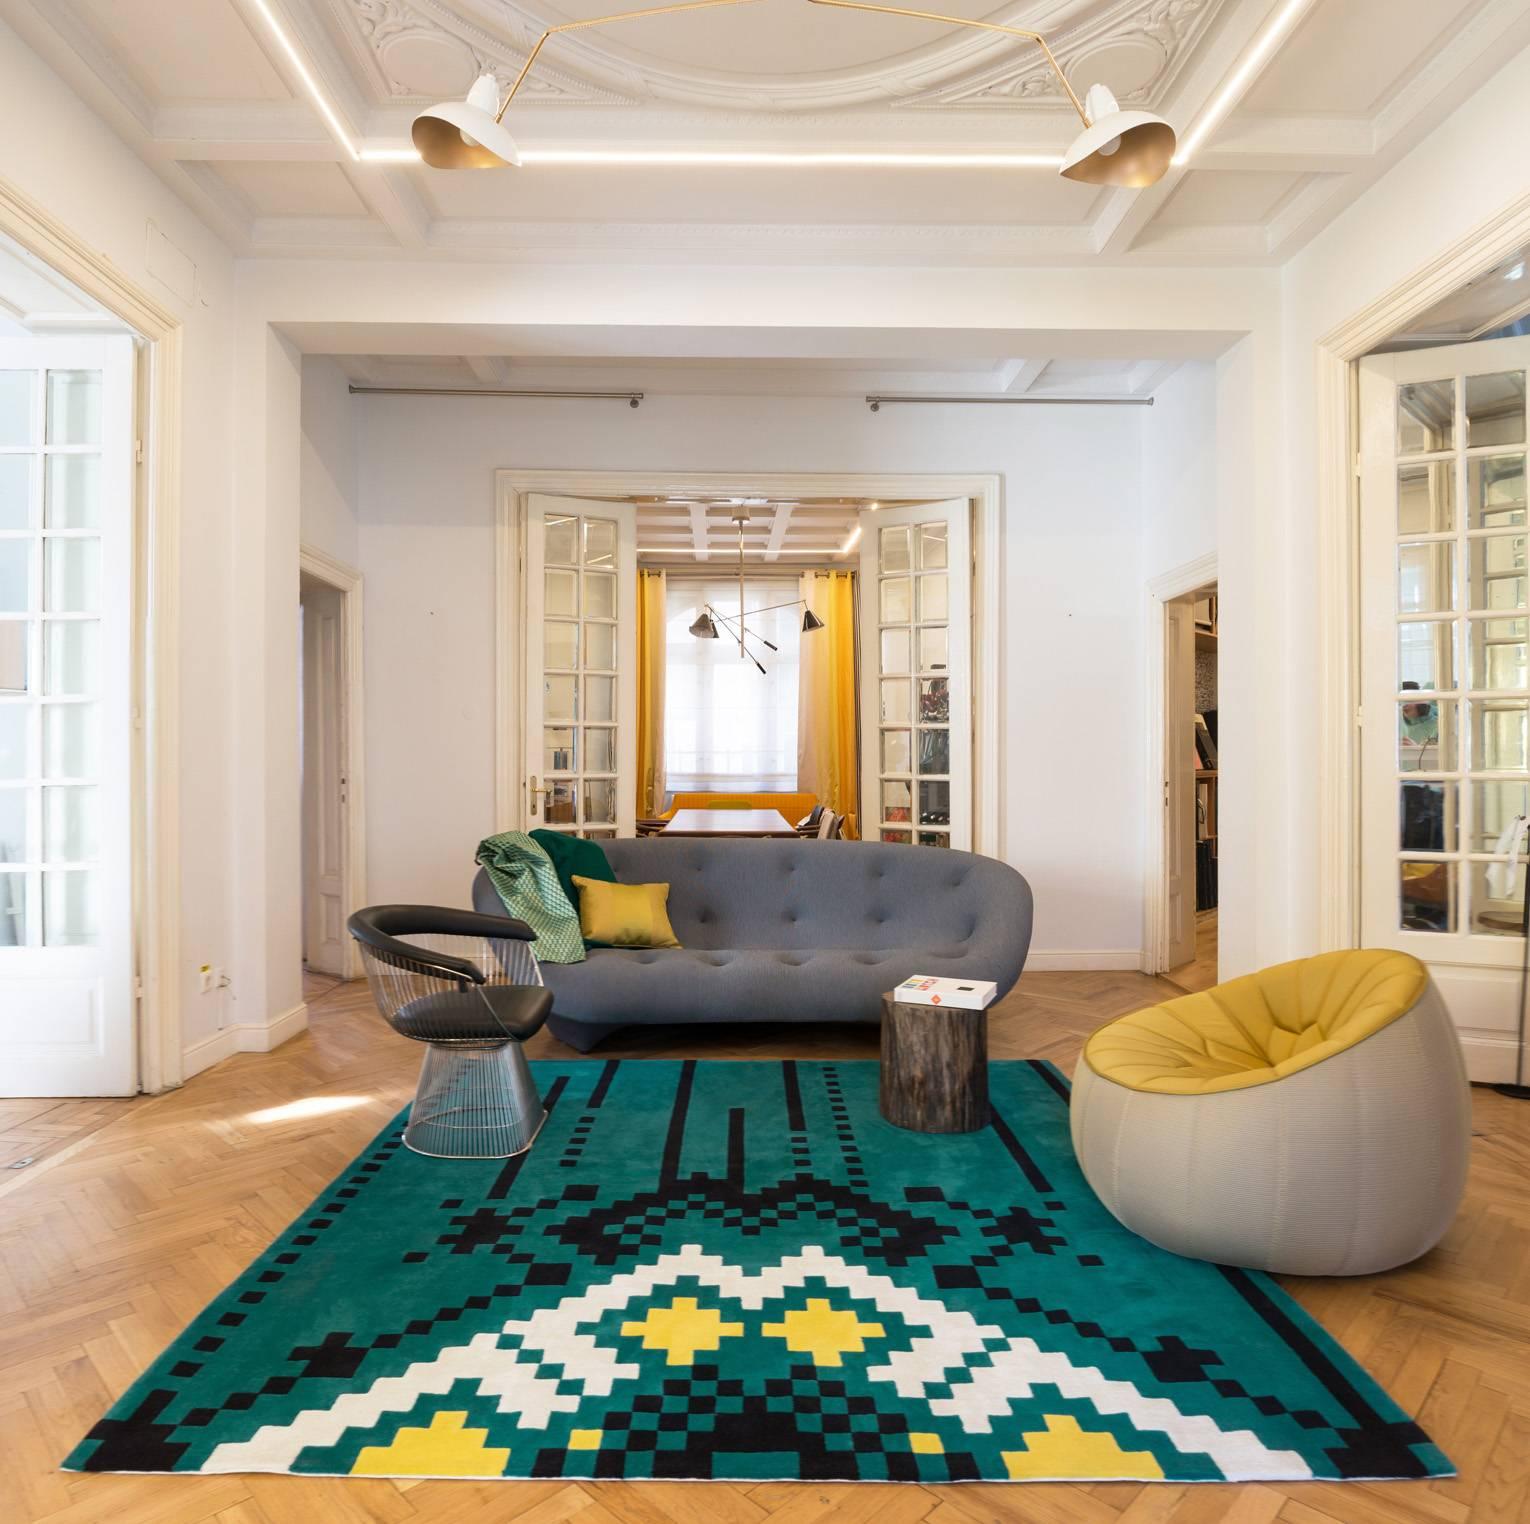 Launched in 2015, Dare to Rug is the first Romanian designer brand that creates hand-tufted rugs, mixing craft and design inspired by traditional patterns.

